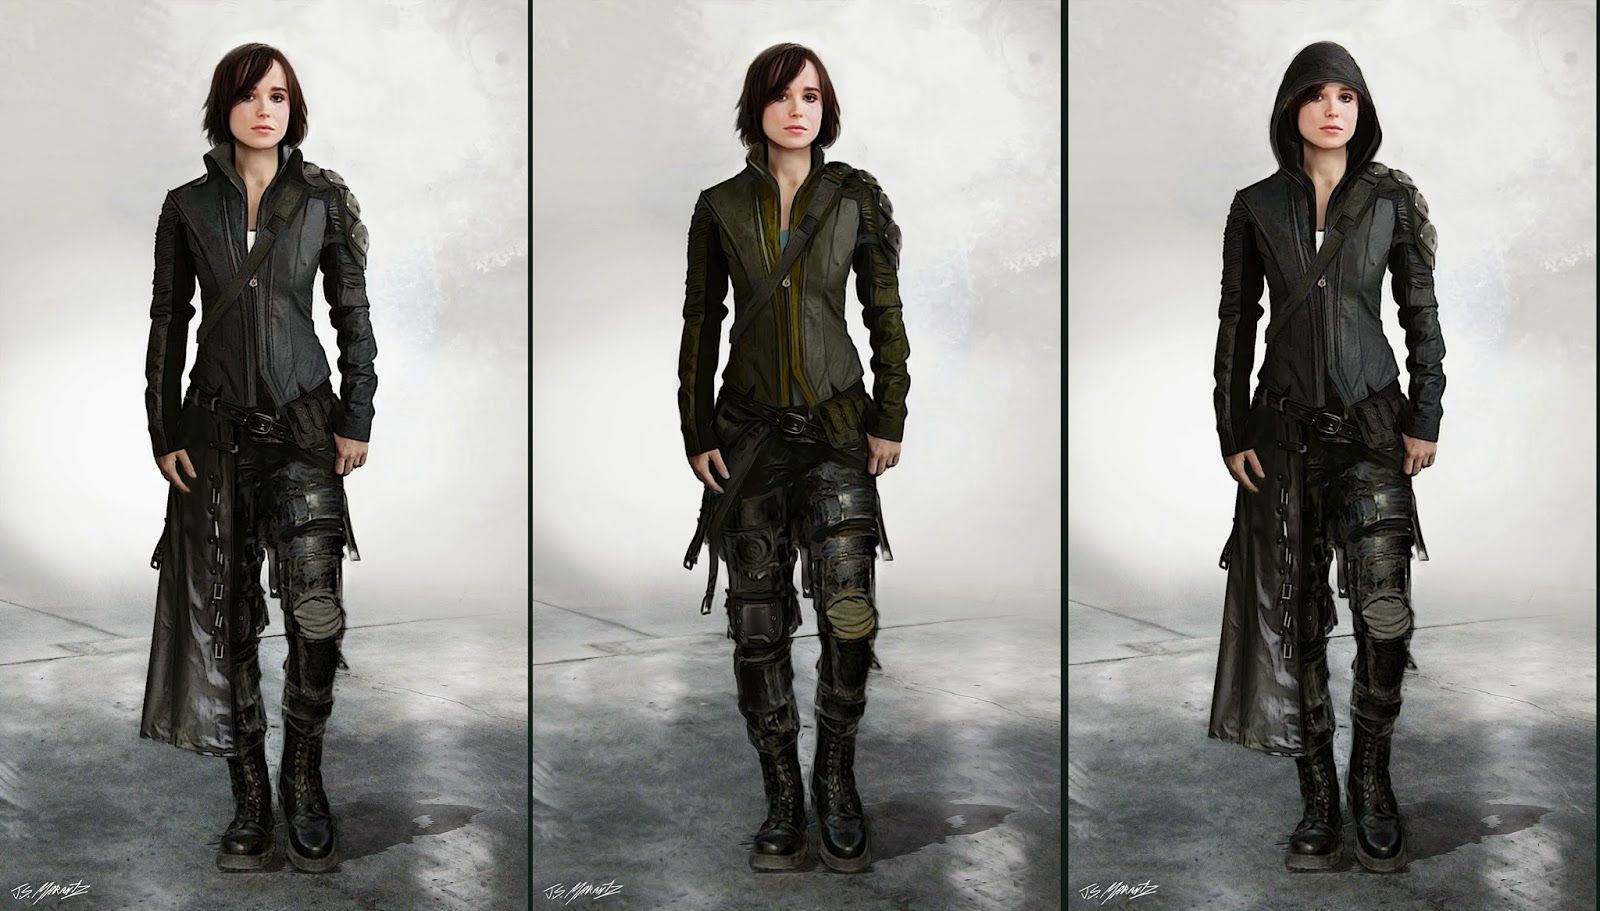 X-Men Days of Future Past Kitty Pryde Concept Art #2